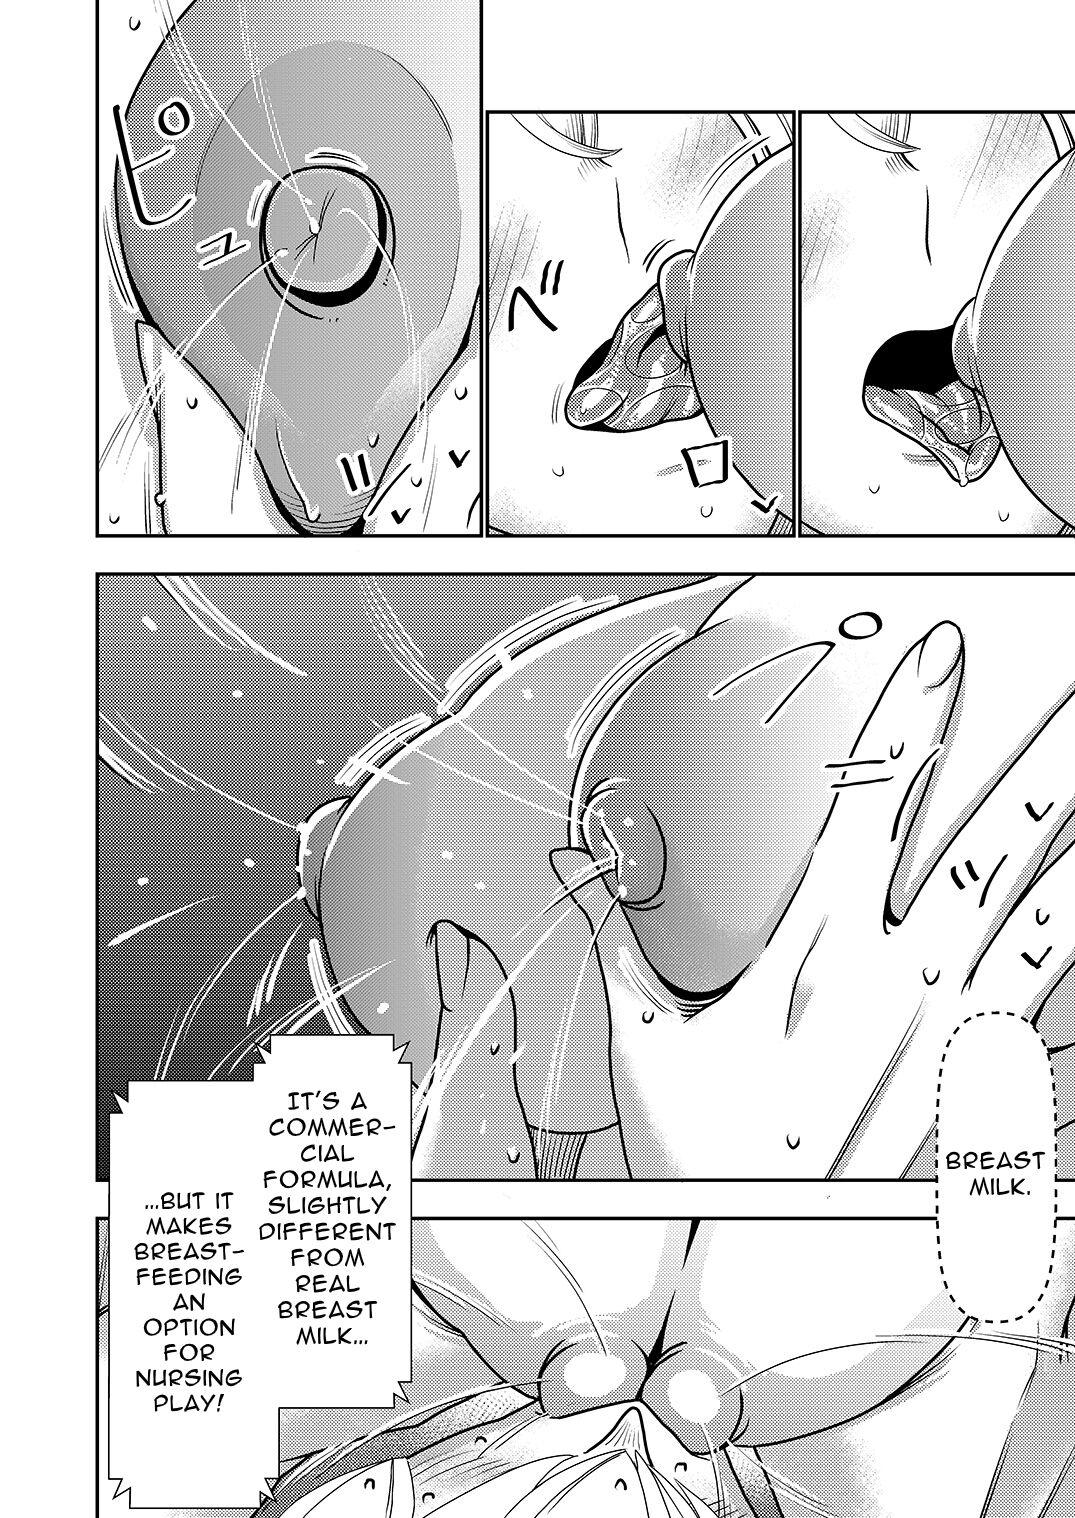 Rough Sex This Defective Sexaroid is TOO LEWD, so I'm thinking of returning it! - Original Amature Allure - Page 8